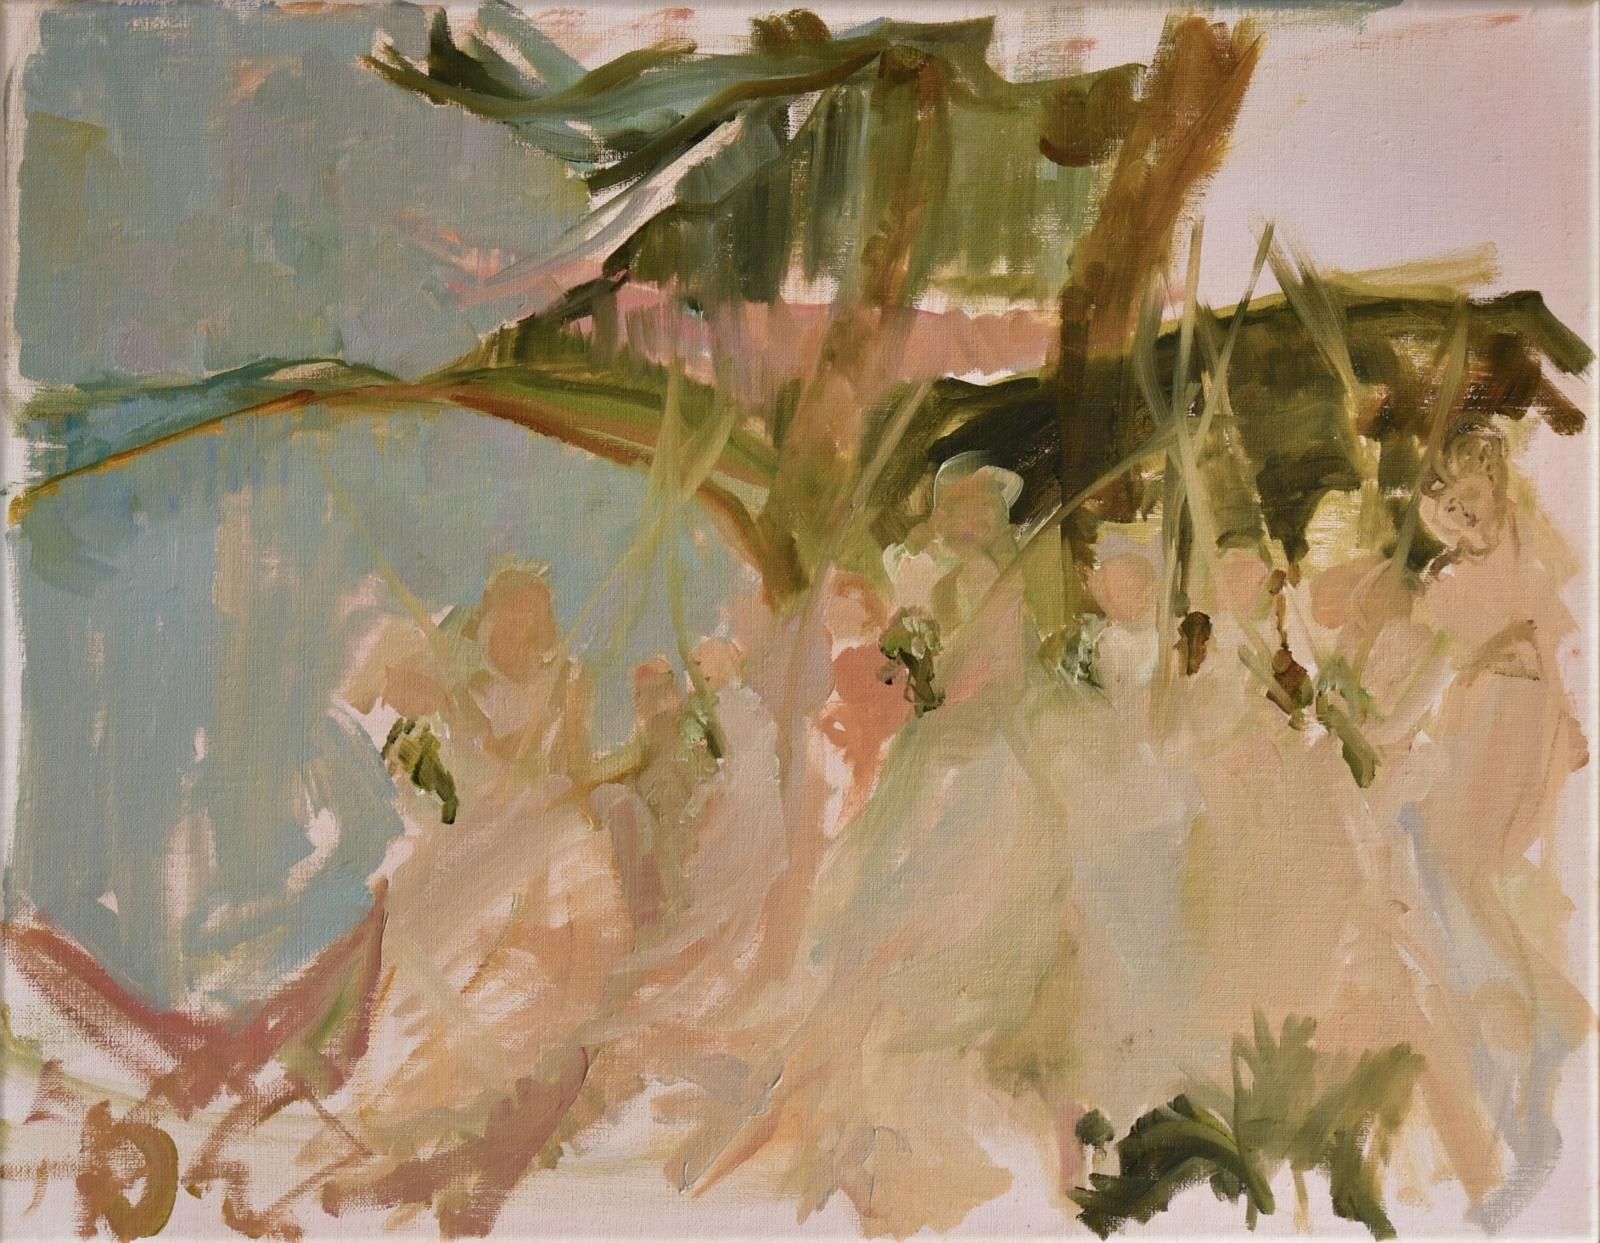 Ladies Dancing with Willows ( Study ) by Elaine Speirs